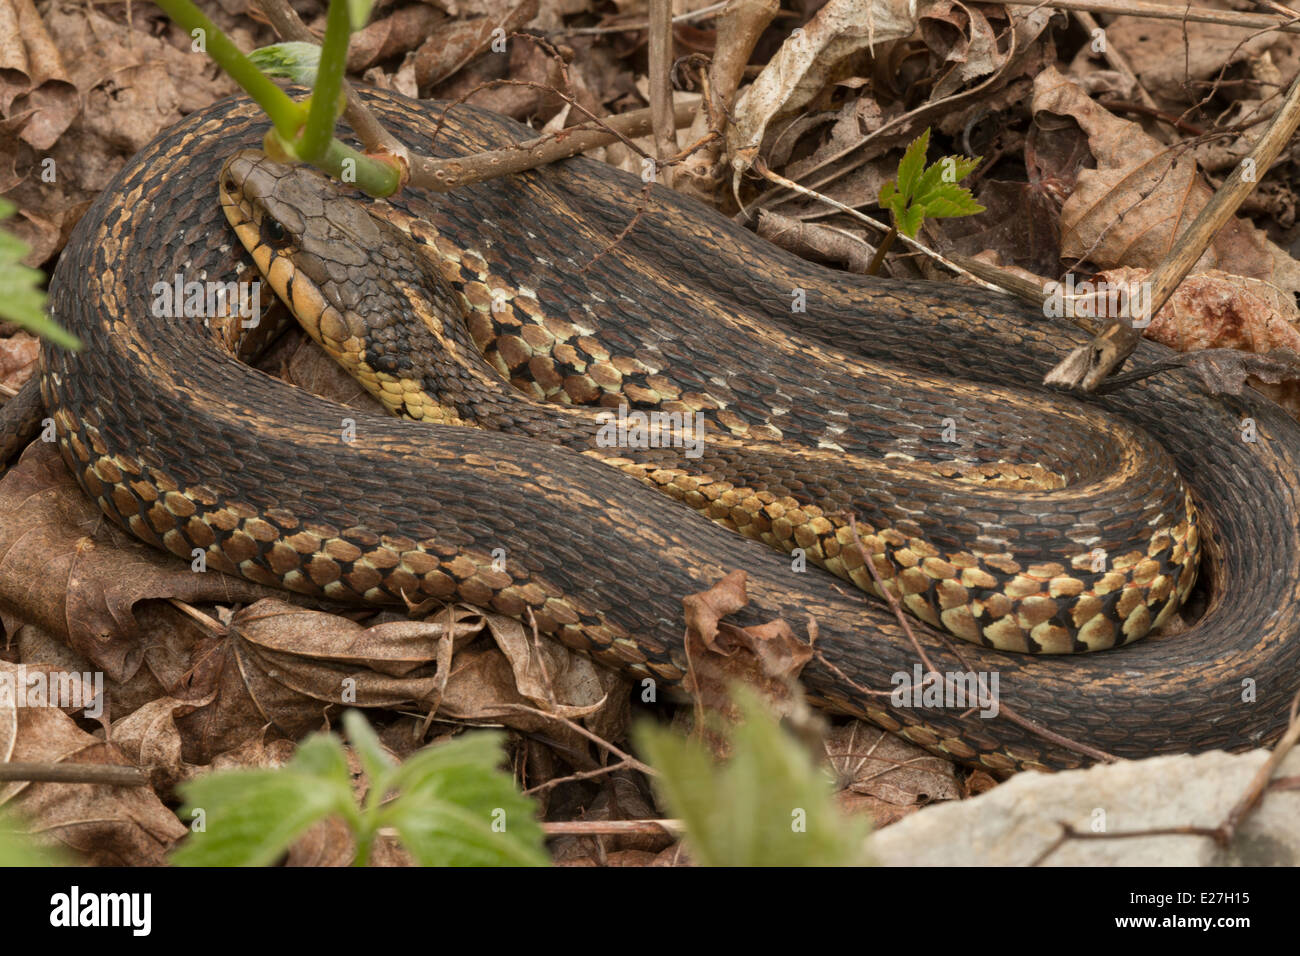 , Thamnophis sirtalis, New York Banque D'Images